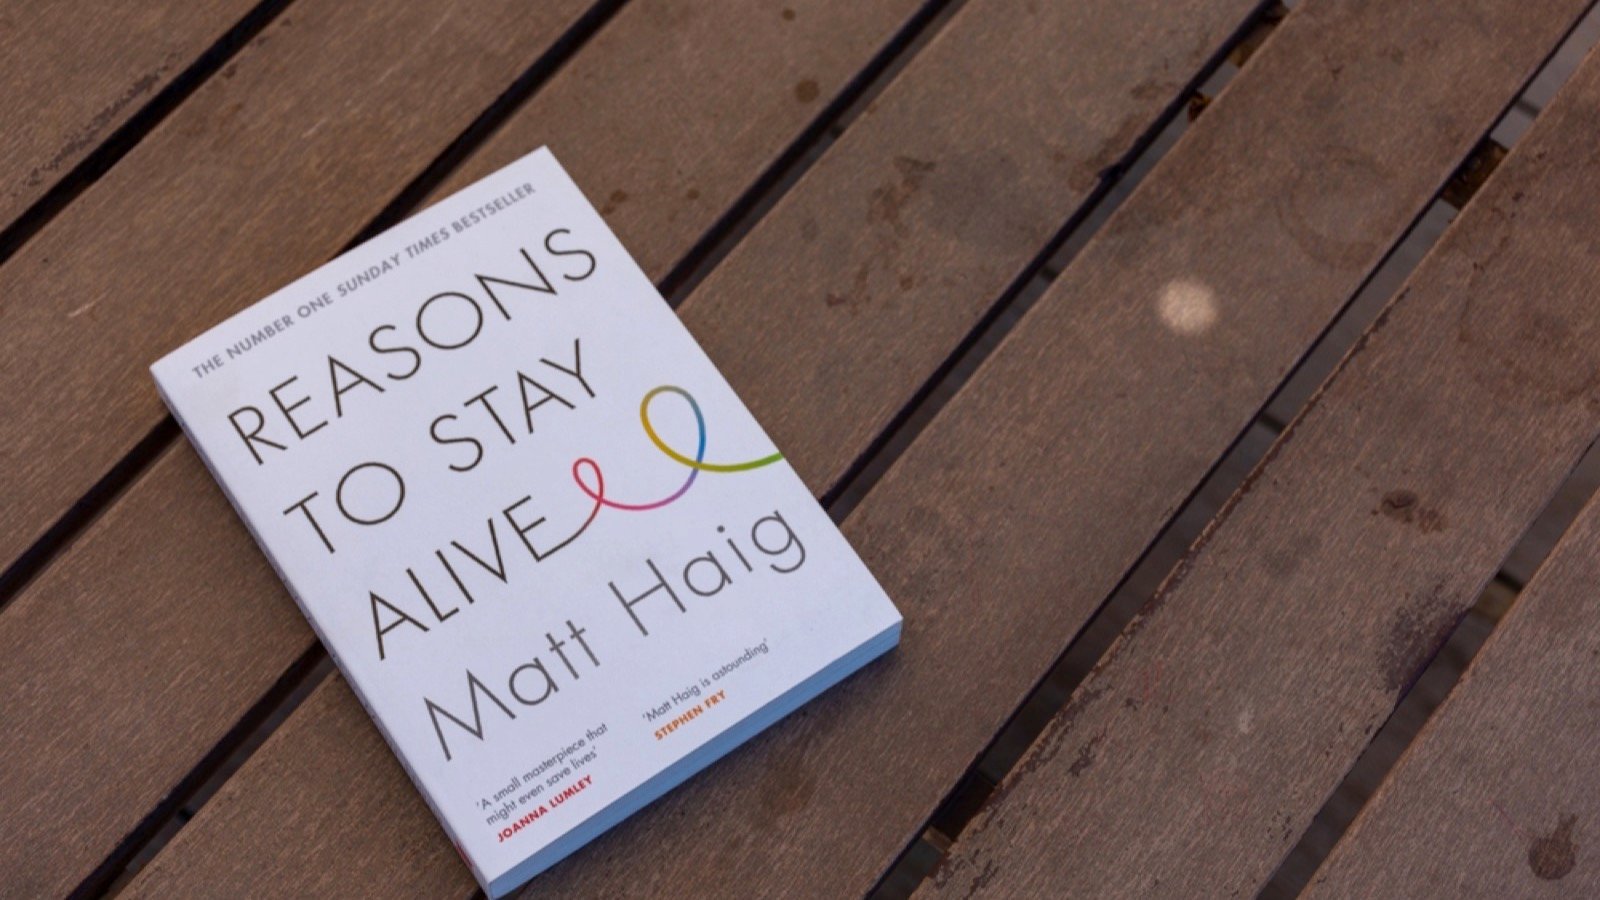 <p>What does depression feel like, and is there a way out? In this book, Haig, a novelist, chronicles his battles with depression and anxiety and how he eventually found his way back to life. The book offers hope, encouragement, and practical advice to anyone who is dealing with depression.</p>